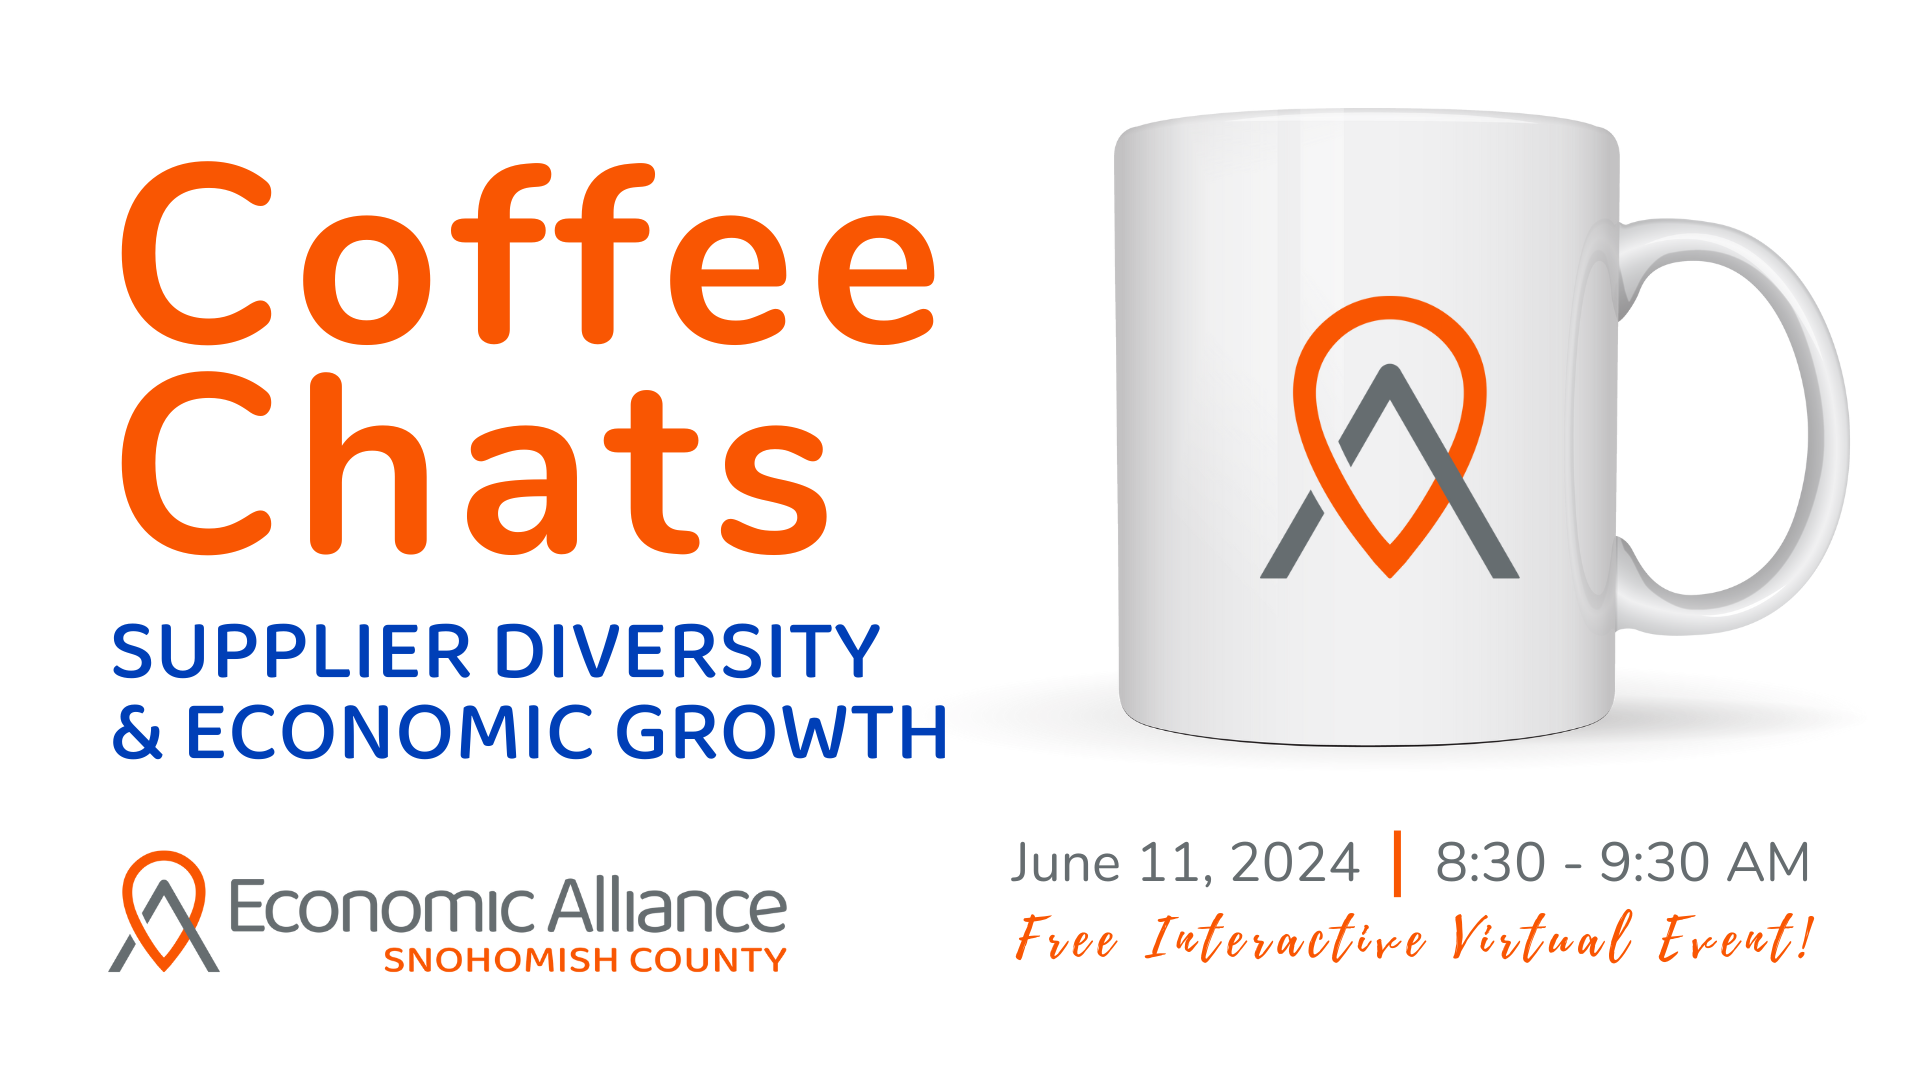 Event Promo Photo For Coffee Chats: Supplier Diversity & Economic Growth